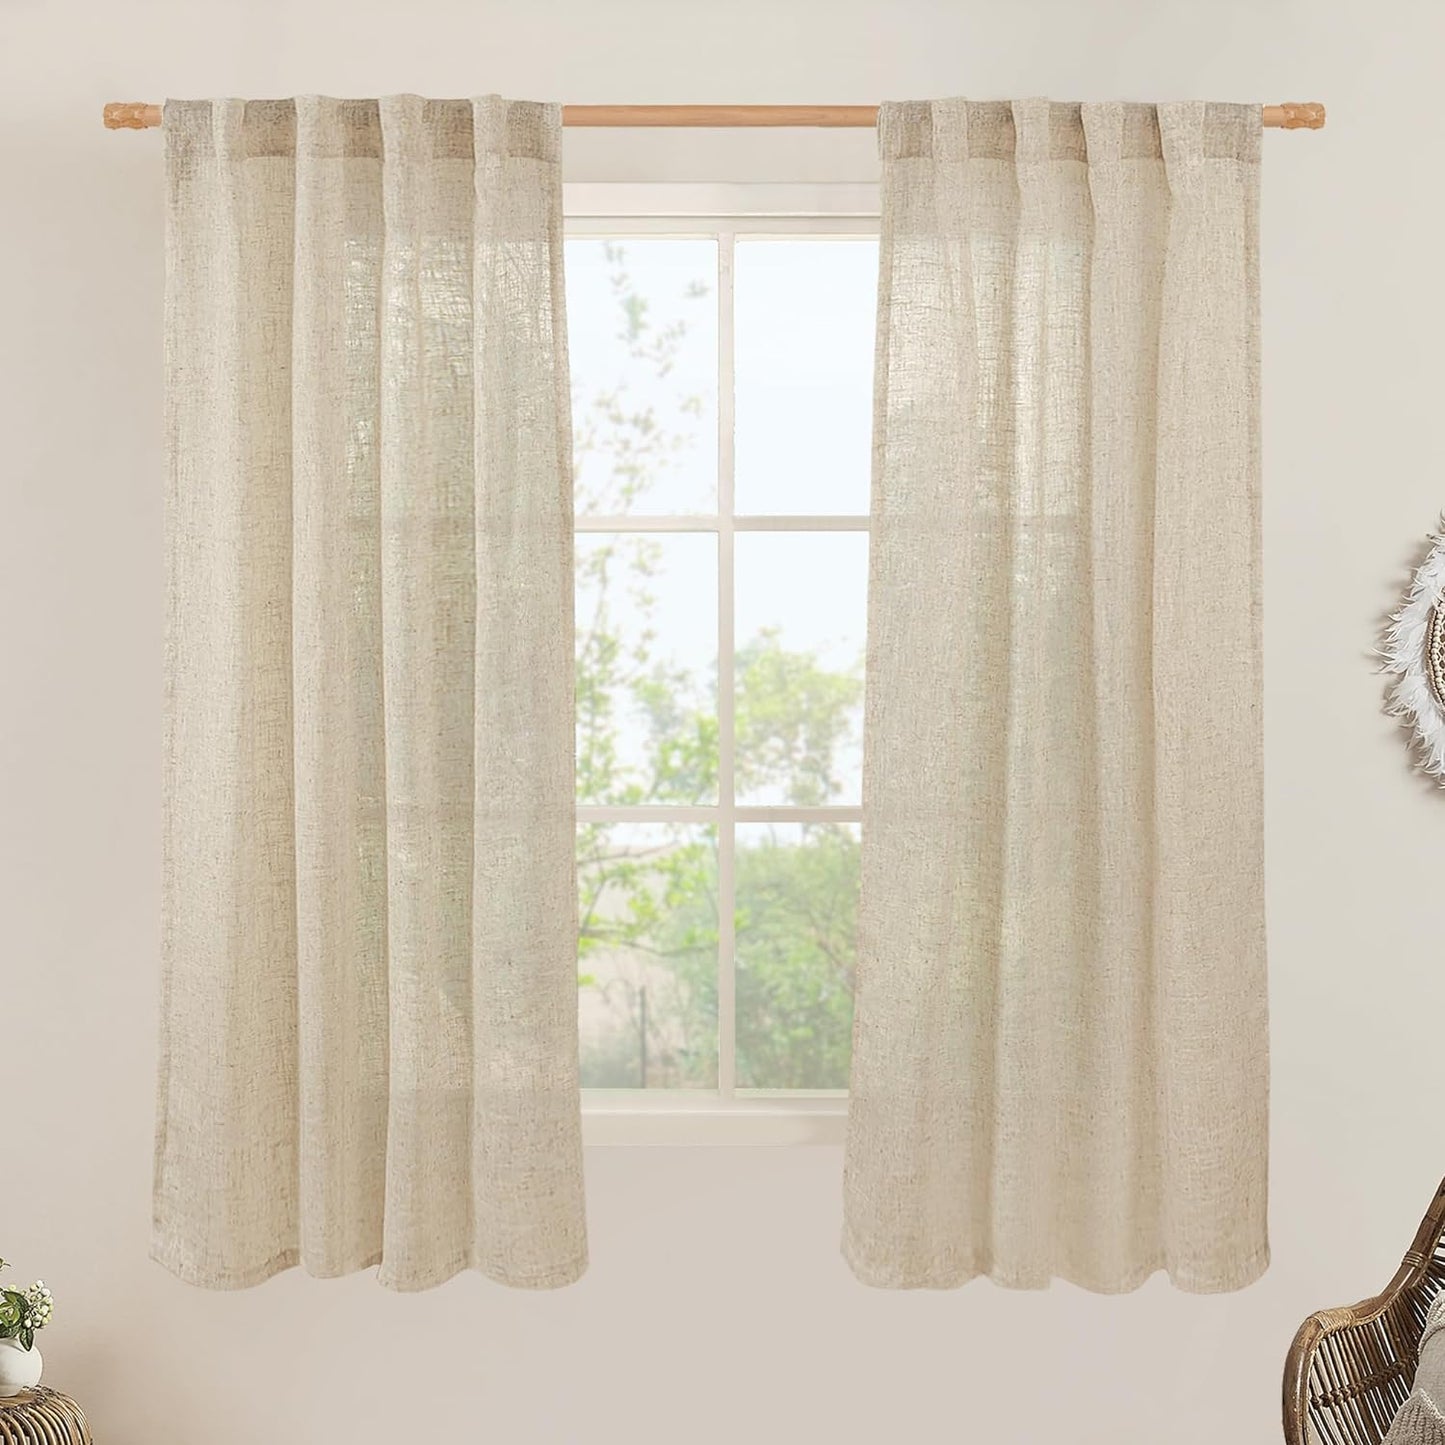 LAMIT Natural Linen Blended Curtains for Living Room, Back Tab and Rod Pocket Semi Sheer Curtains Light Filtering Country Rustic Drapes for Bedroom/Farmhouse, 2 Panels,52 X 108 Inch, Linen  LAMIT Linen 38W X 63L 